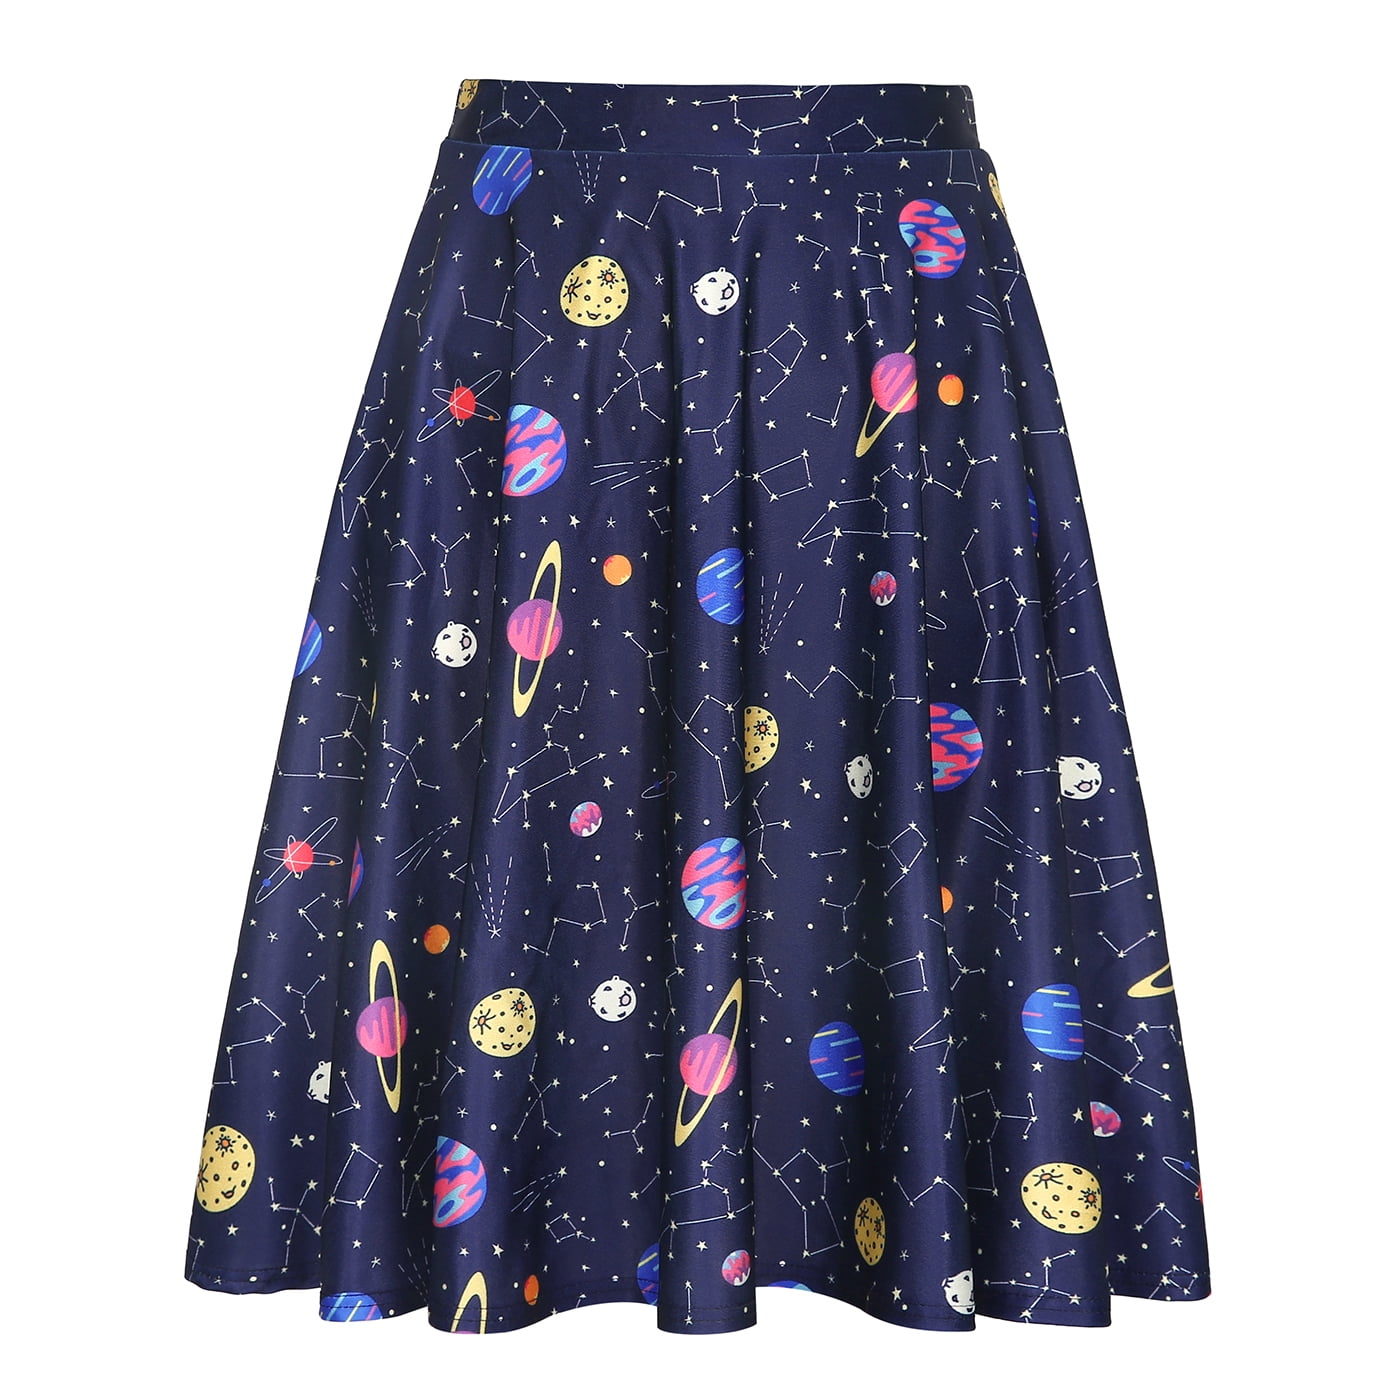 Ladies Blue Galaxy Planets Cosmos & Space Print Flared Skirt Size 8-22